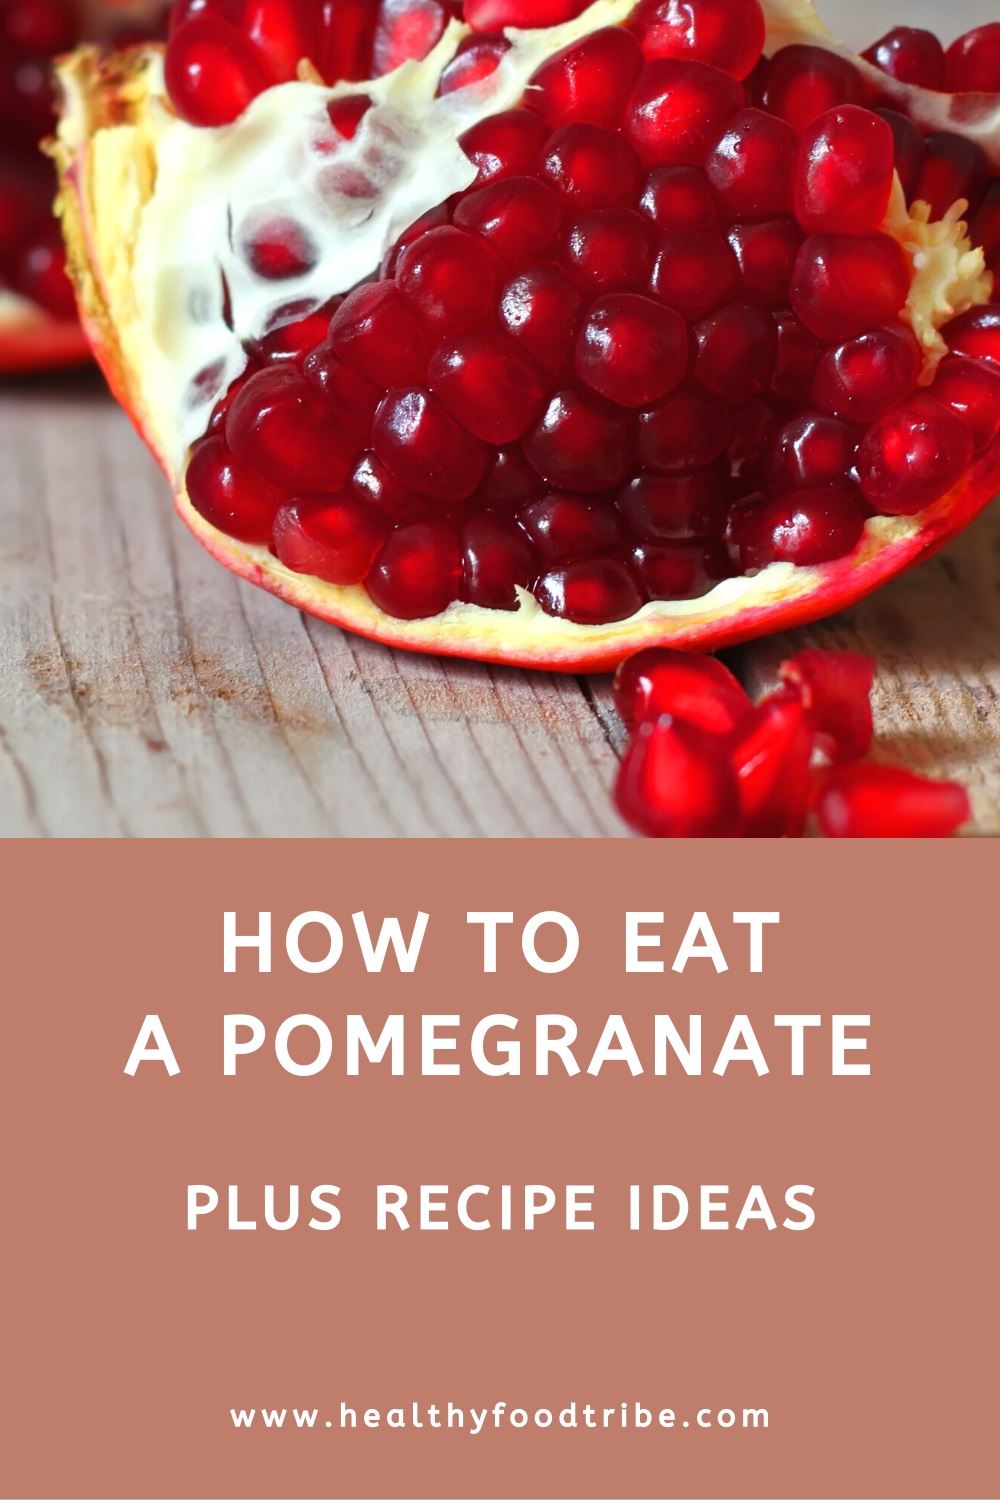 How to cut and eat pomegranate (plus recipe ideas)